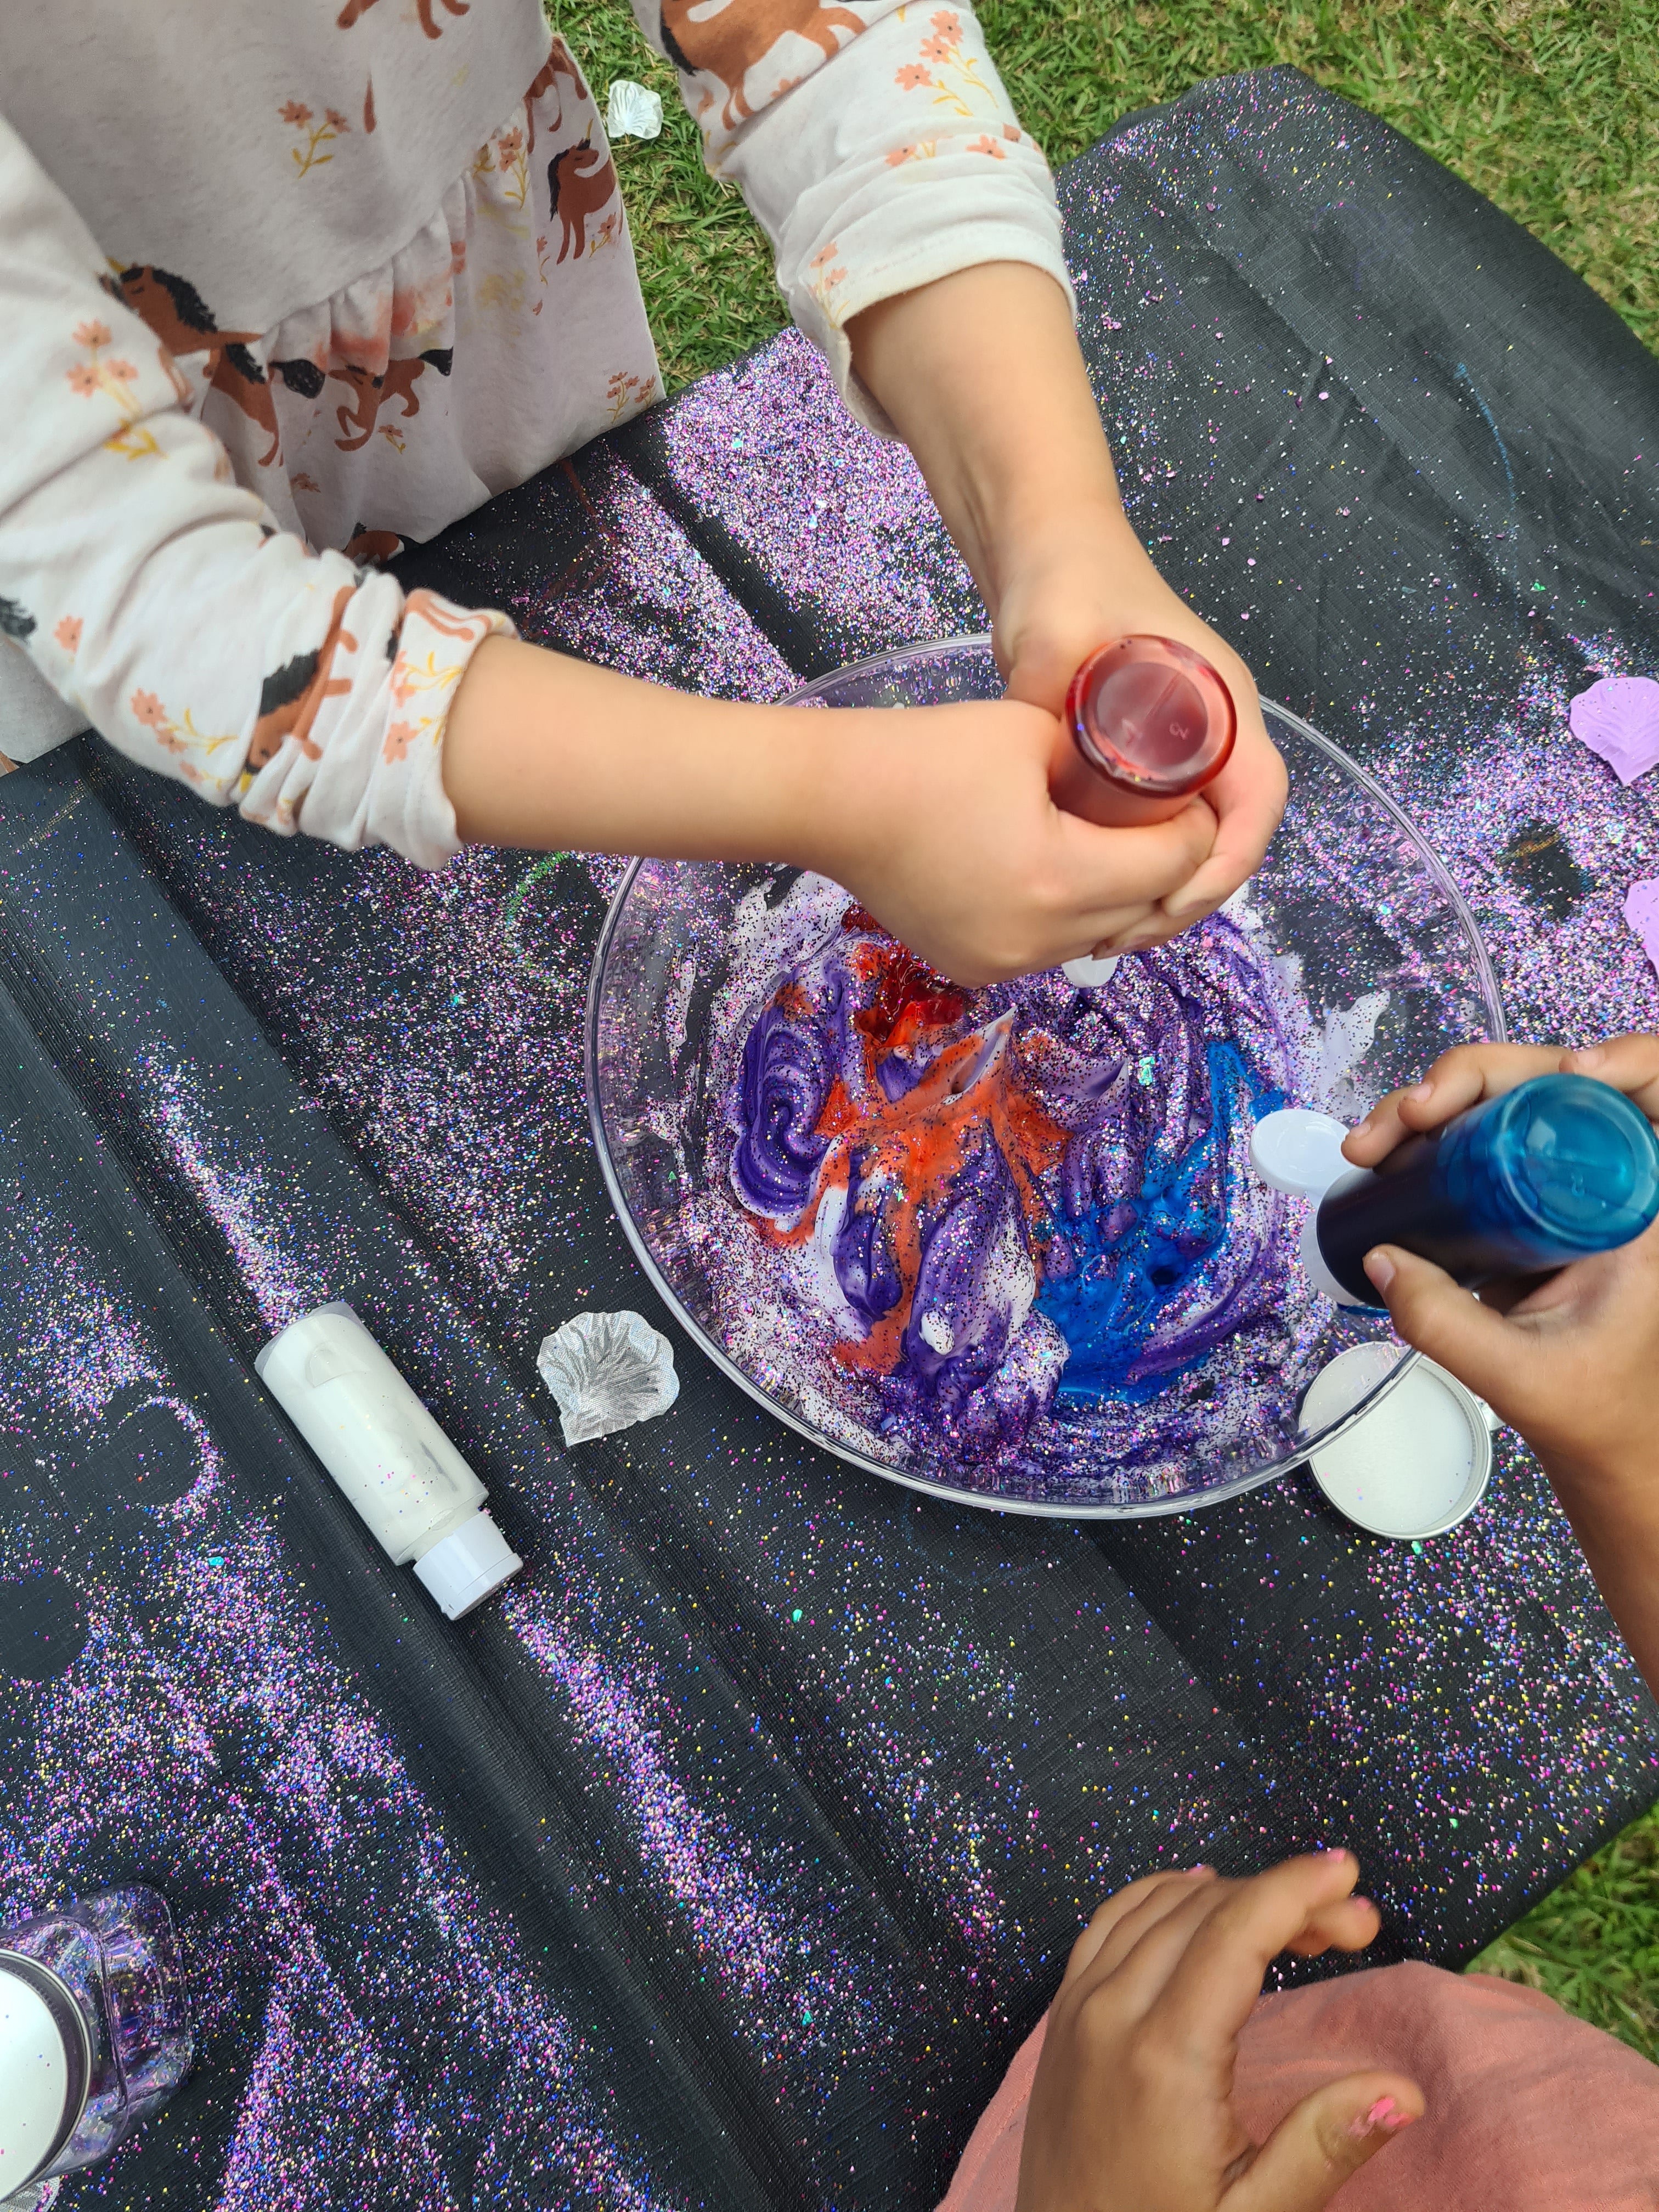 Children playing with glitter, foam and food colouring